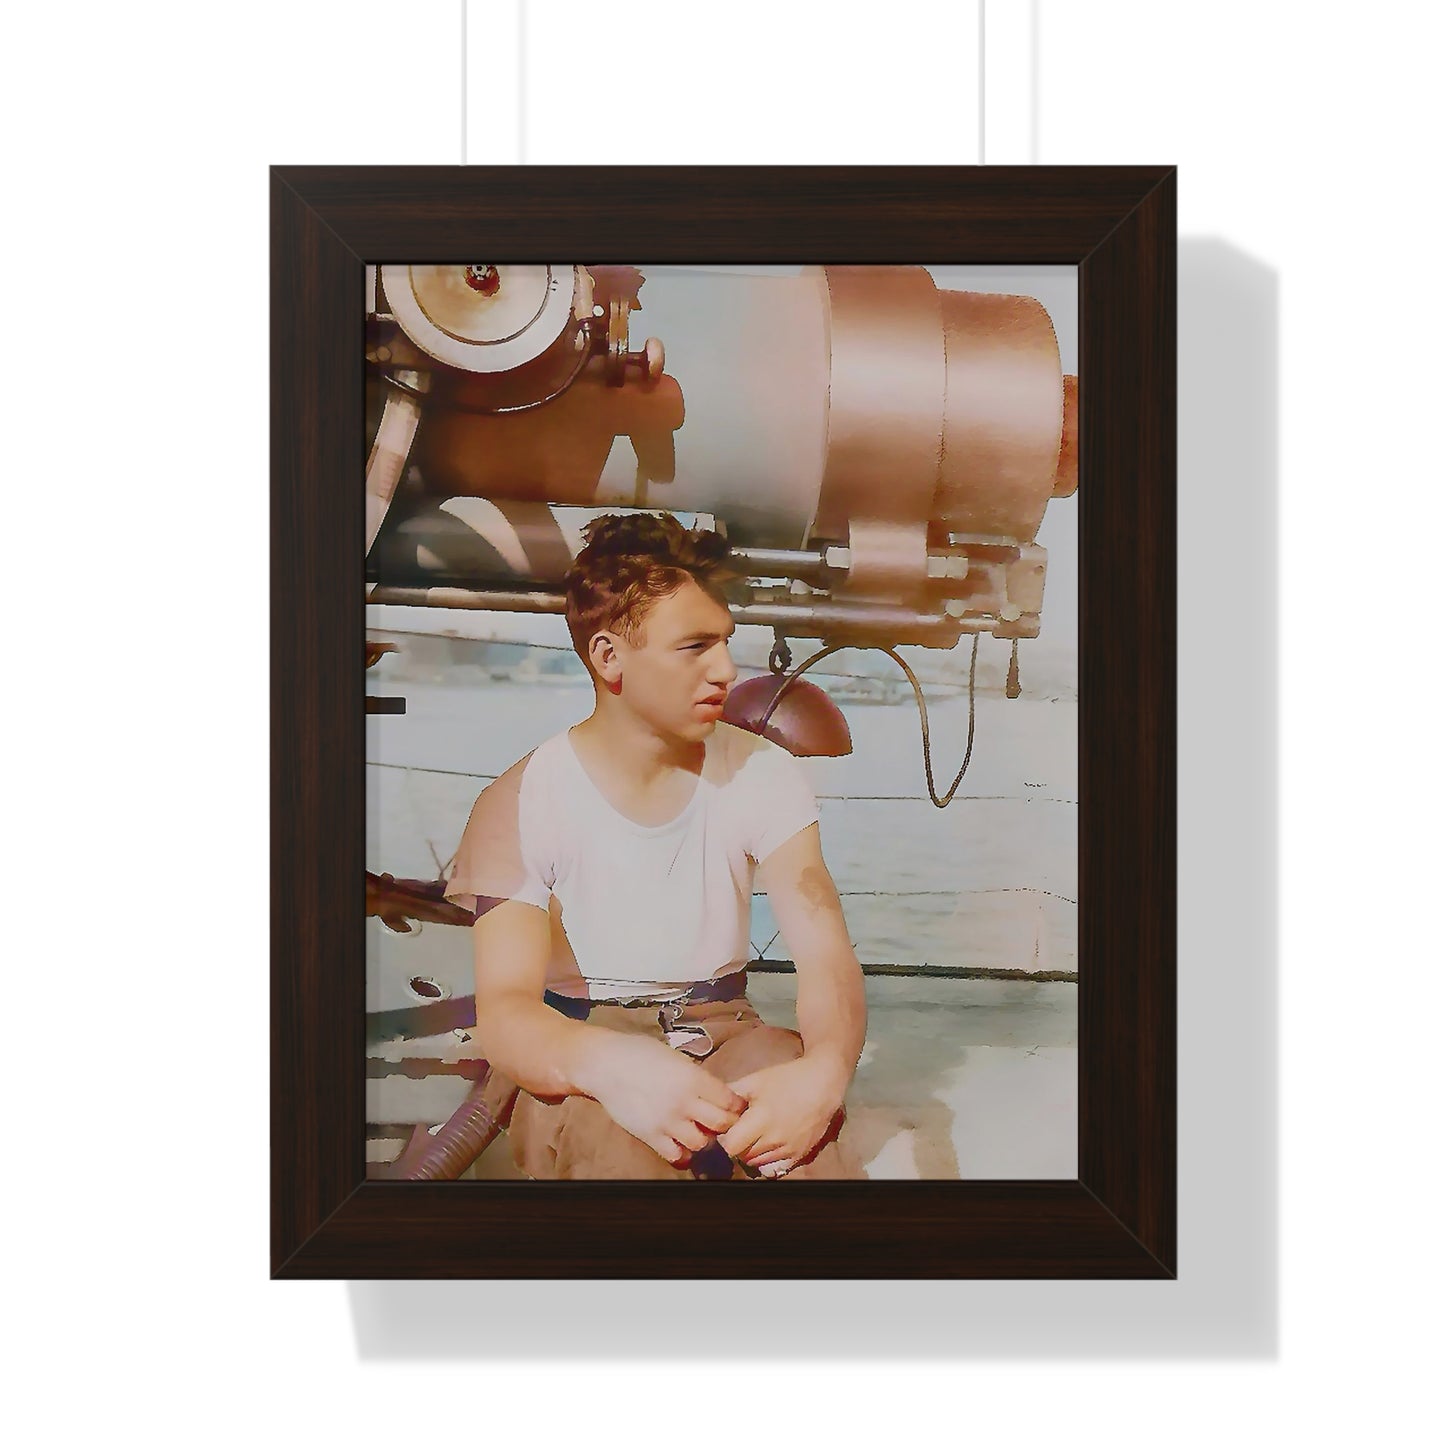 celibataire 026 | Framed Poster Vintage Sailor Photo Ship WWII Tired Young Man Ocean Gay LGBTQ 